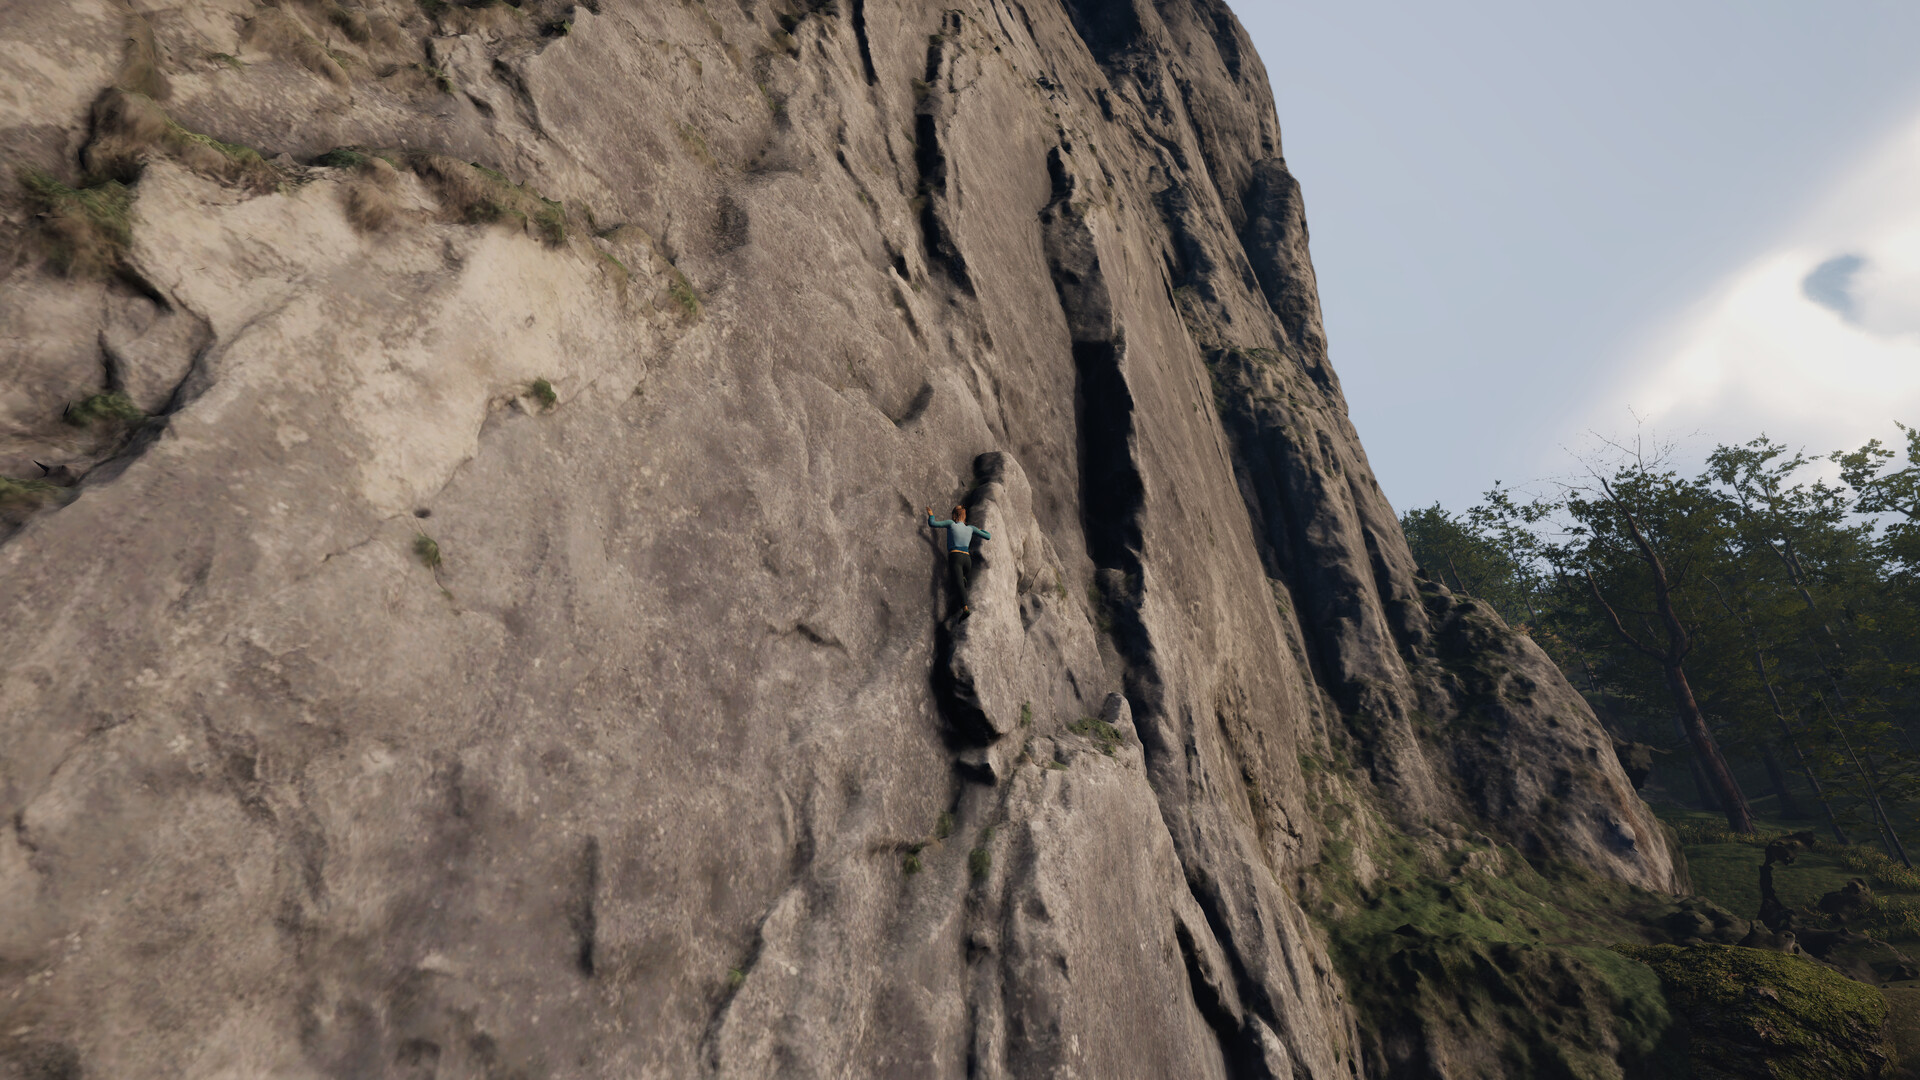 New Heights: Realistic Climbing and Bouldering screenshot